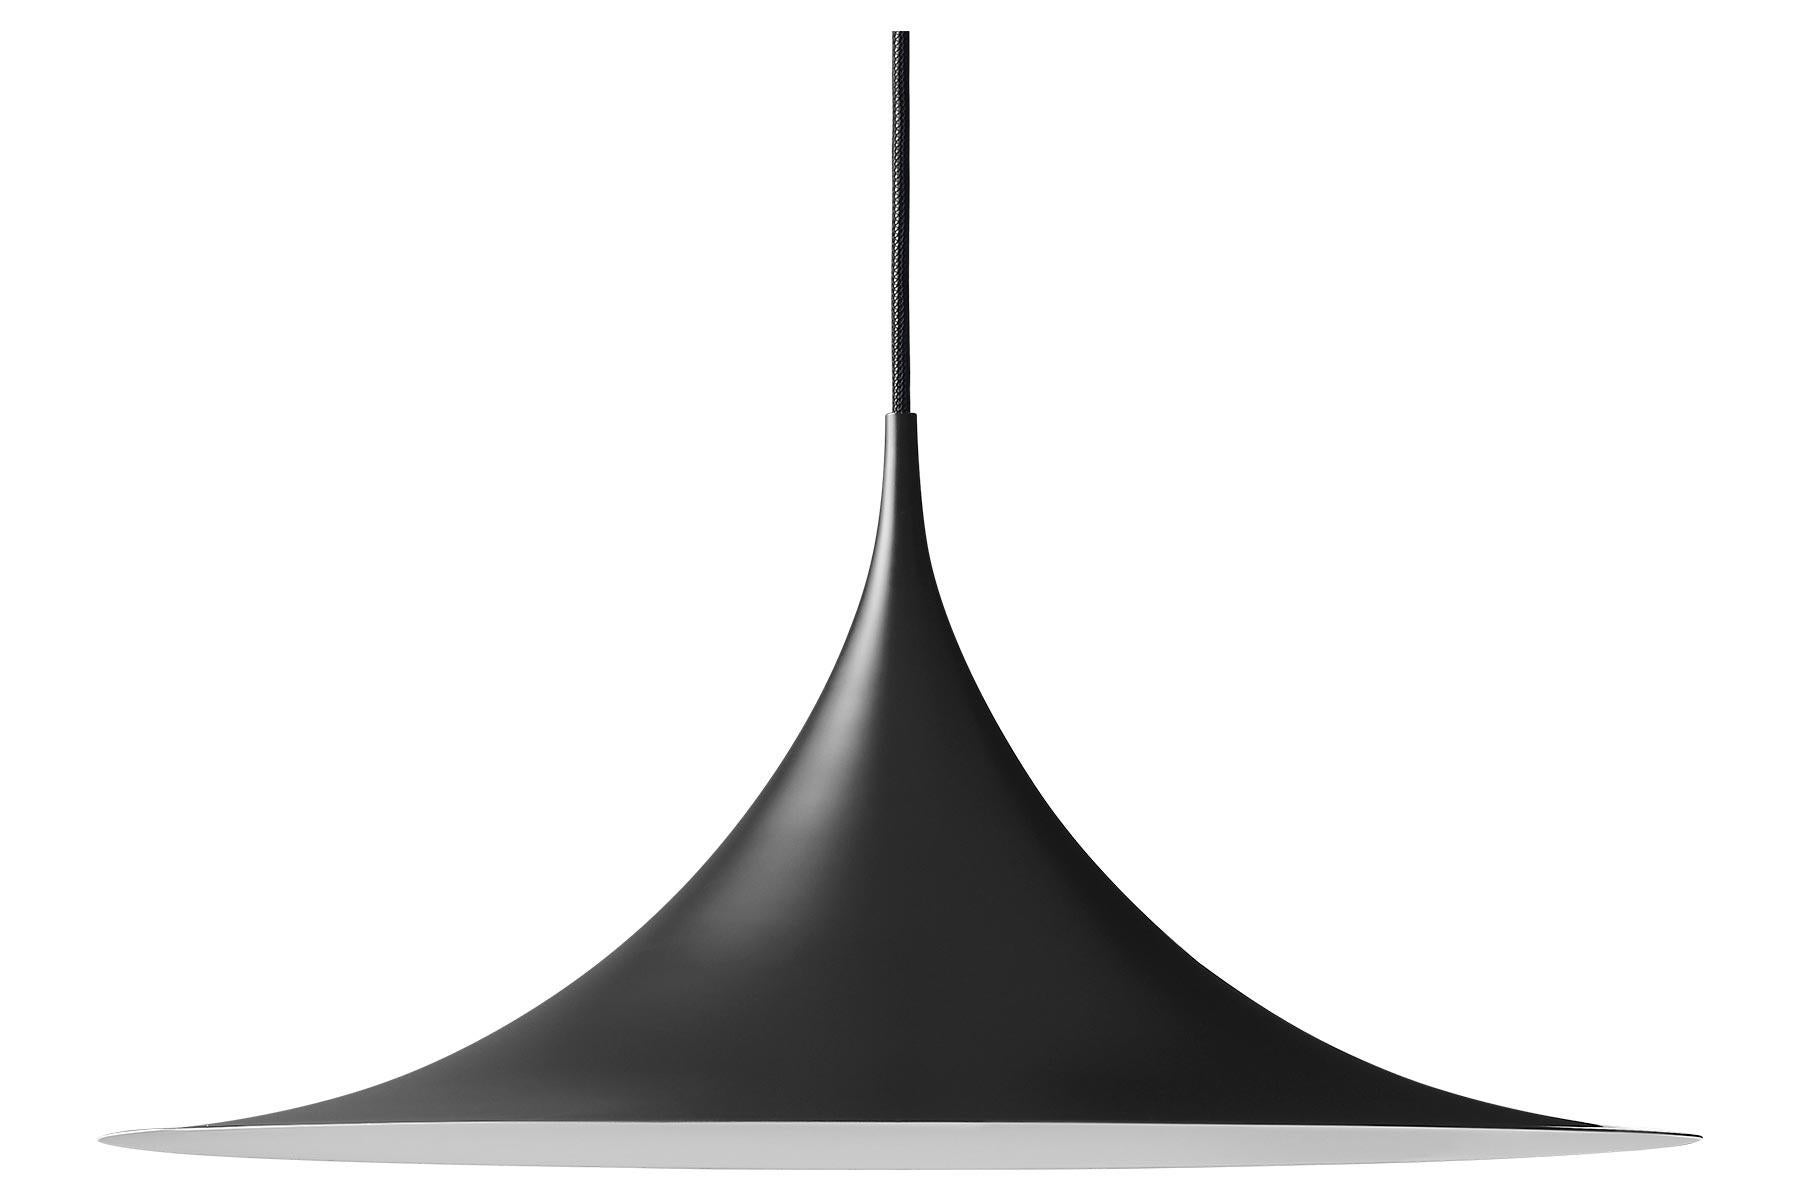 The Semi Pendant is a unique pendant lamp, based on two quarter-circles put together, back-to-back. It’s distinctive arch-shaped, enamelled metal shade creates a diffused, cone-shaped light, ideal over a dining table or kitchen work surface. With